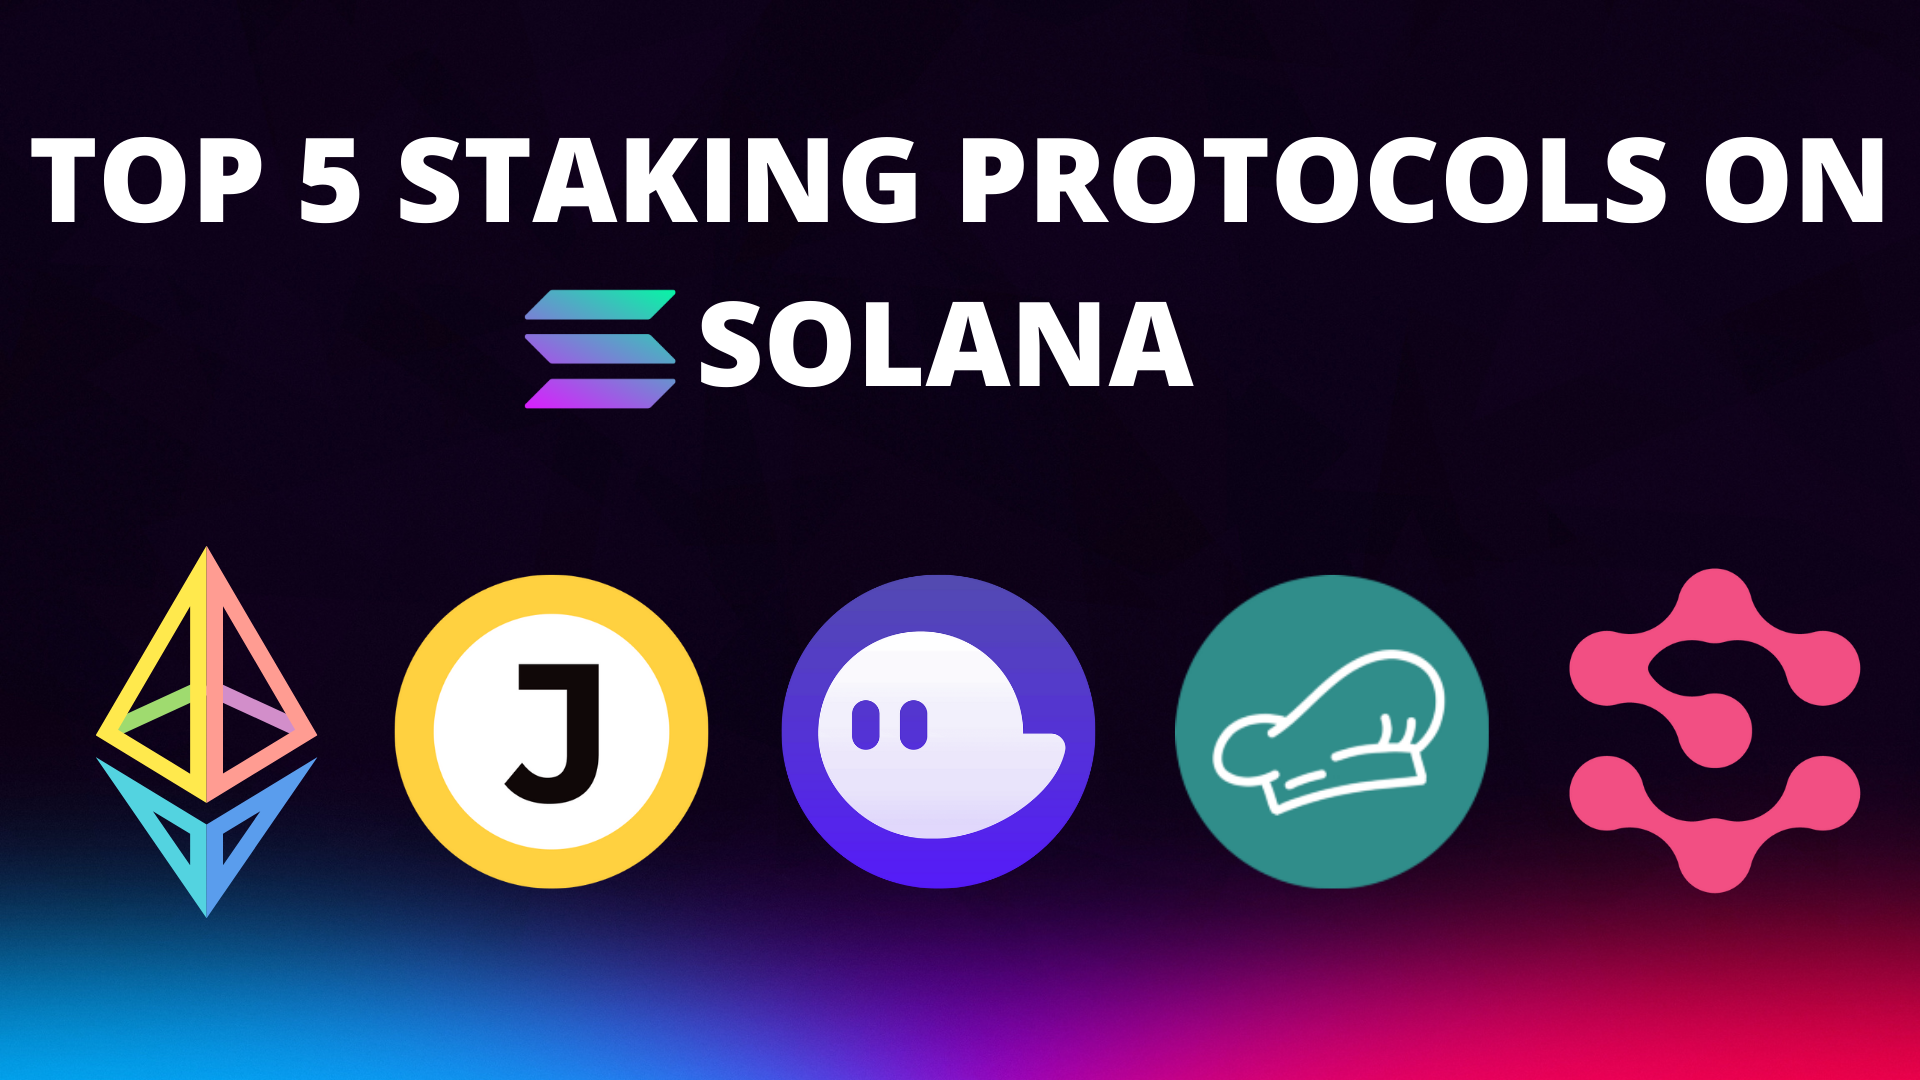 TOP 5 STAKING PROTOCOL ON SOLANA (1)